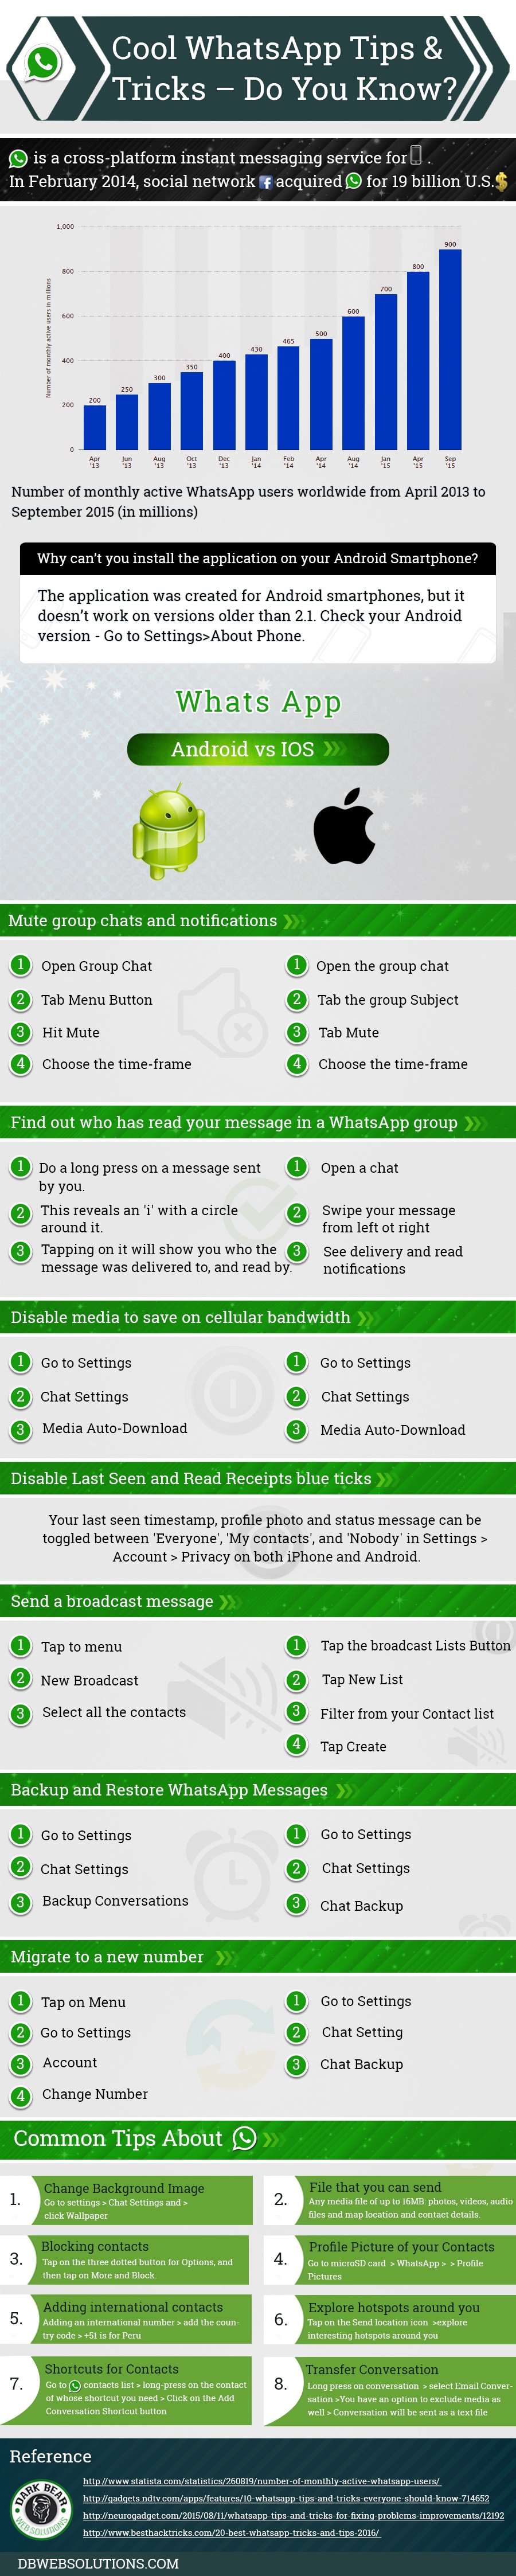 Cool Whats App Tips and Tricks - Infographic